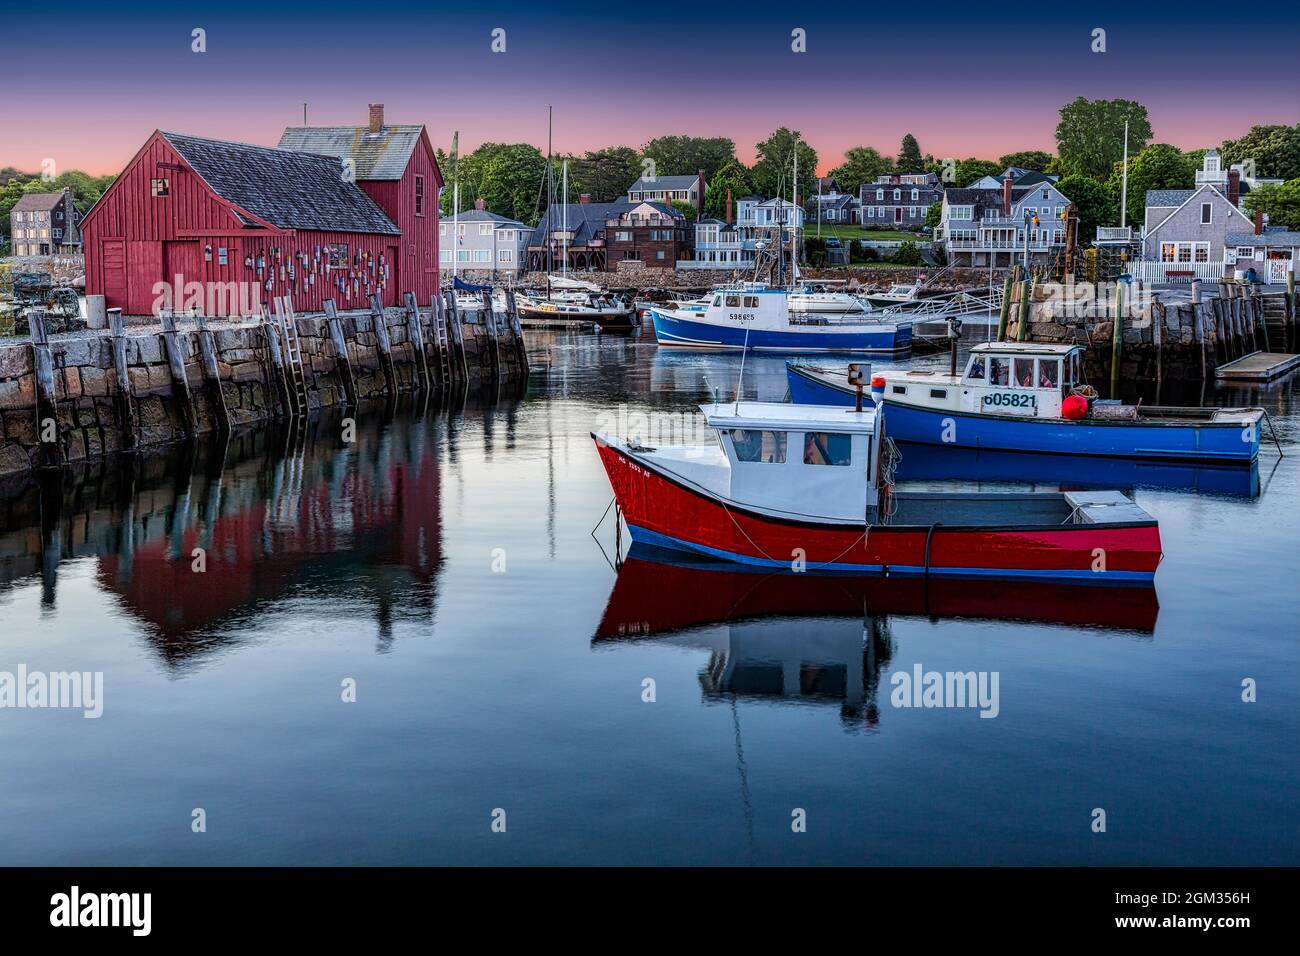 Motif Number One ME - The quintessential New England Motif Number One sunrise. Located on Bradley Wharf in the harbor town of Rockport. Motif Number O Stock Photo